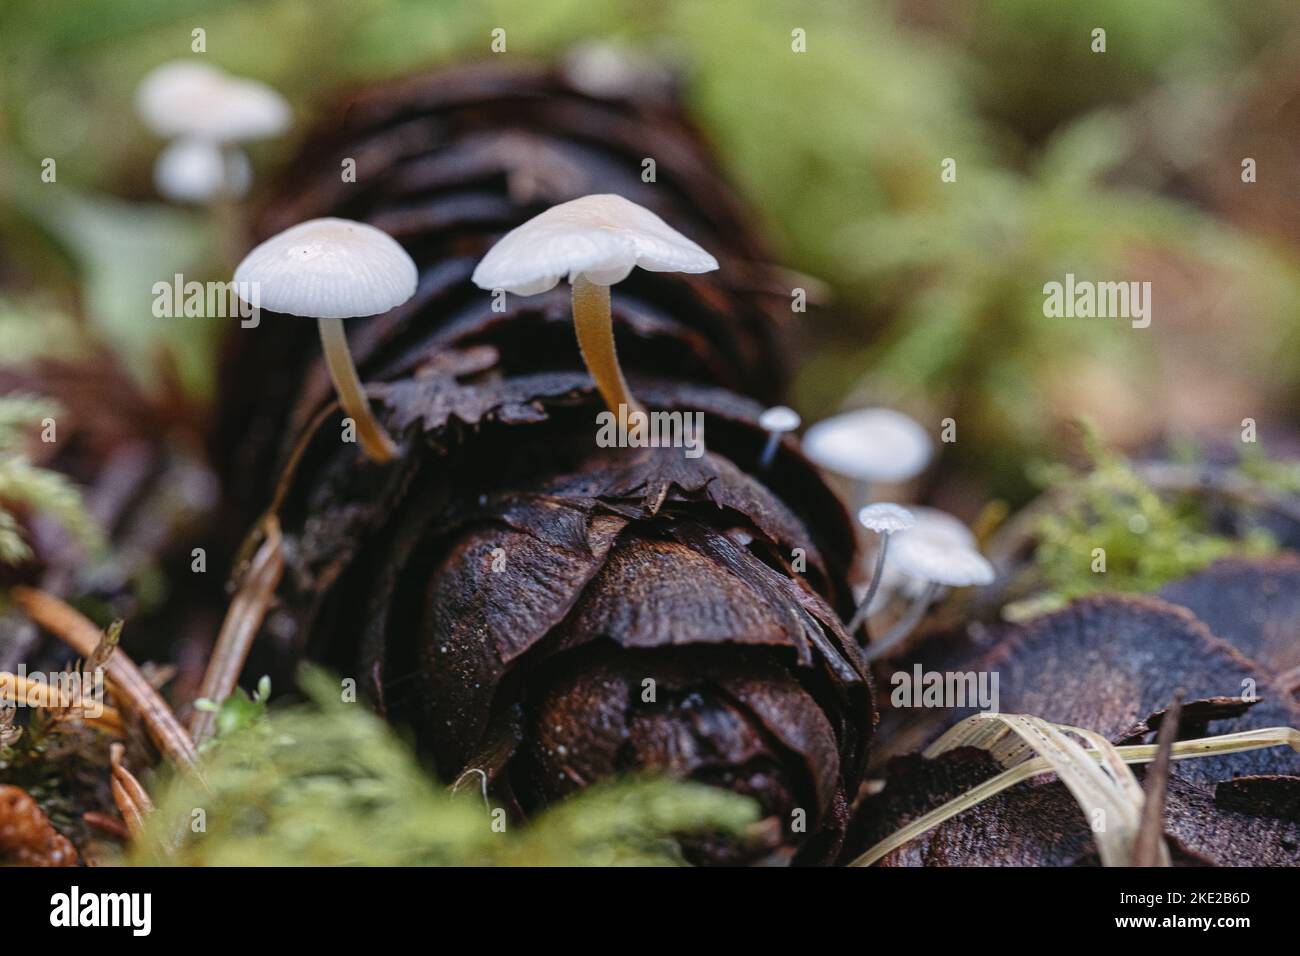 Fungus grows out of a Douglas fir cone on mossy ground Stock Photo